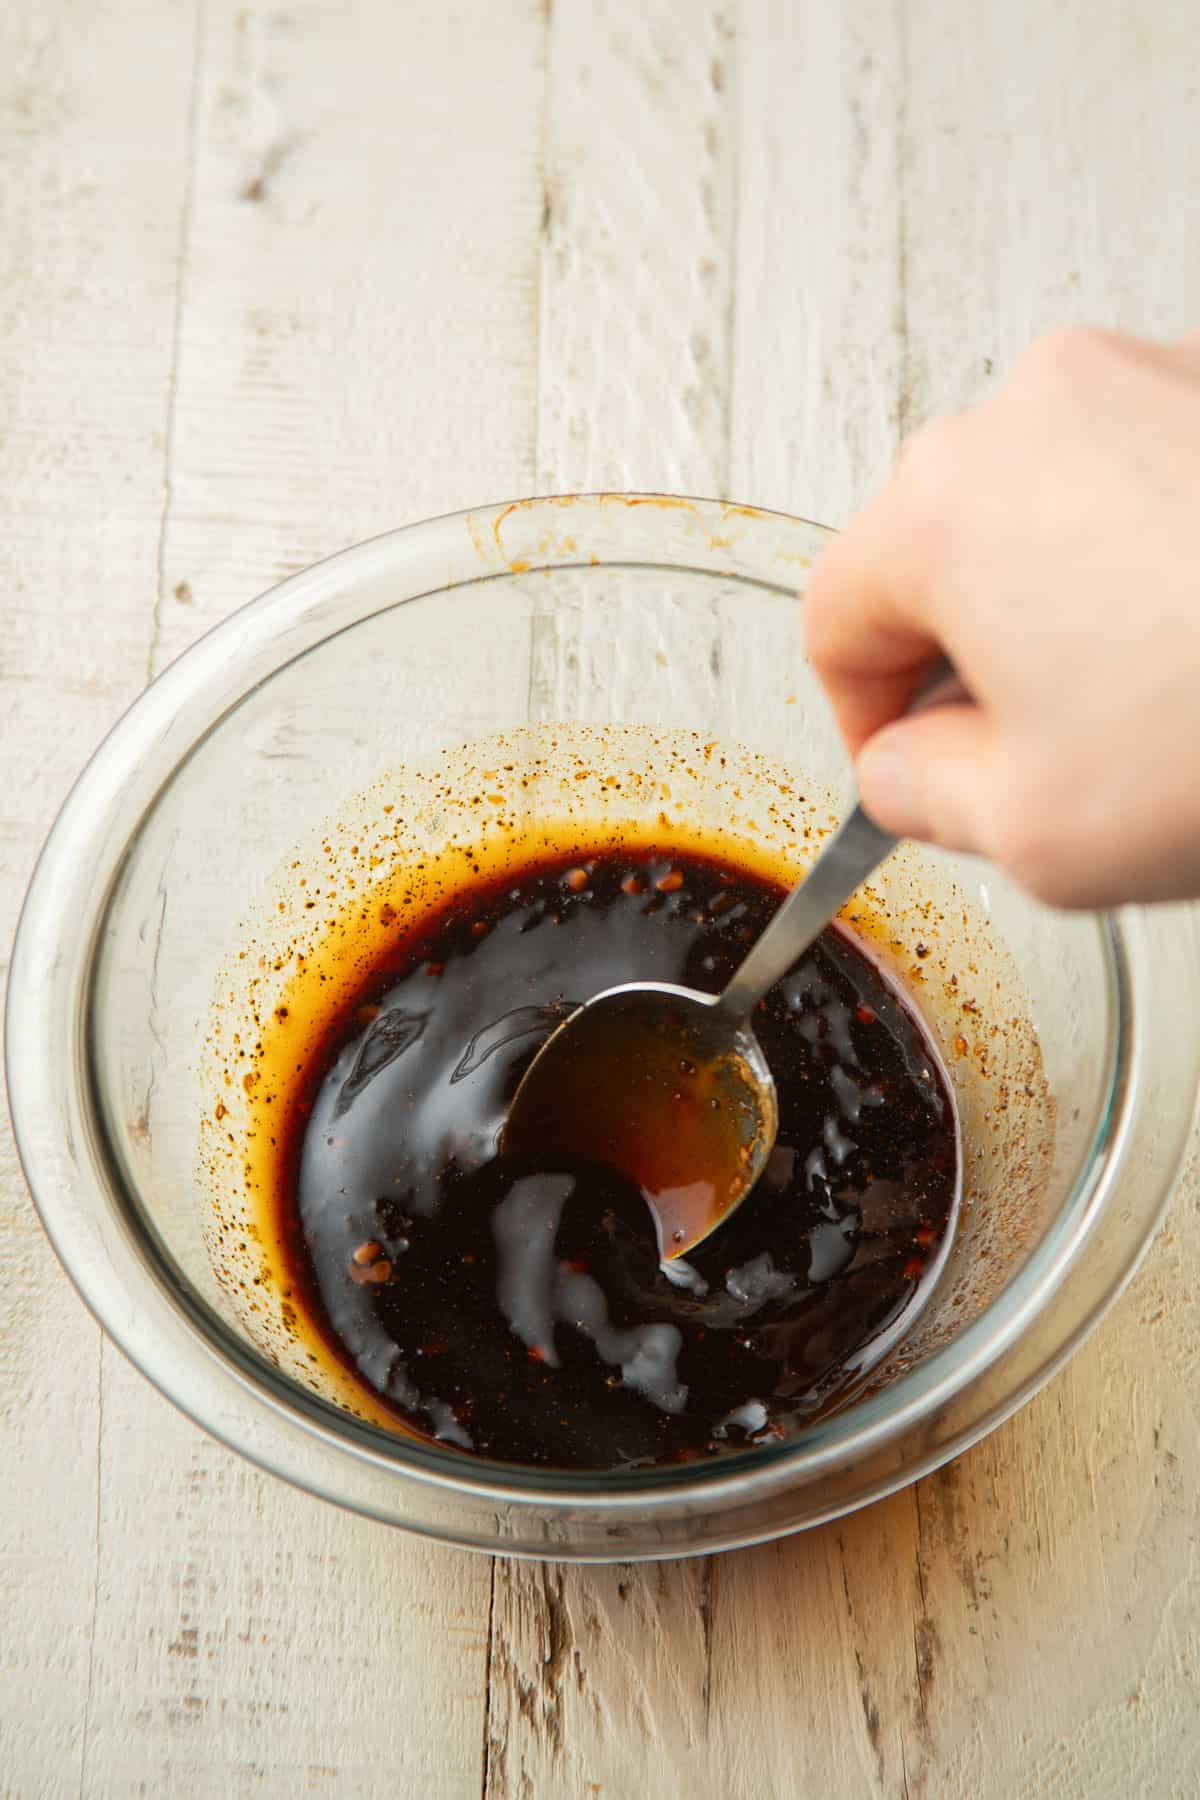 Hand stirring black pepper sauce ingredients together in a glass bowl.